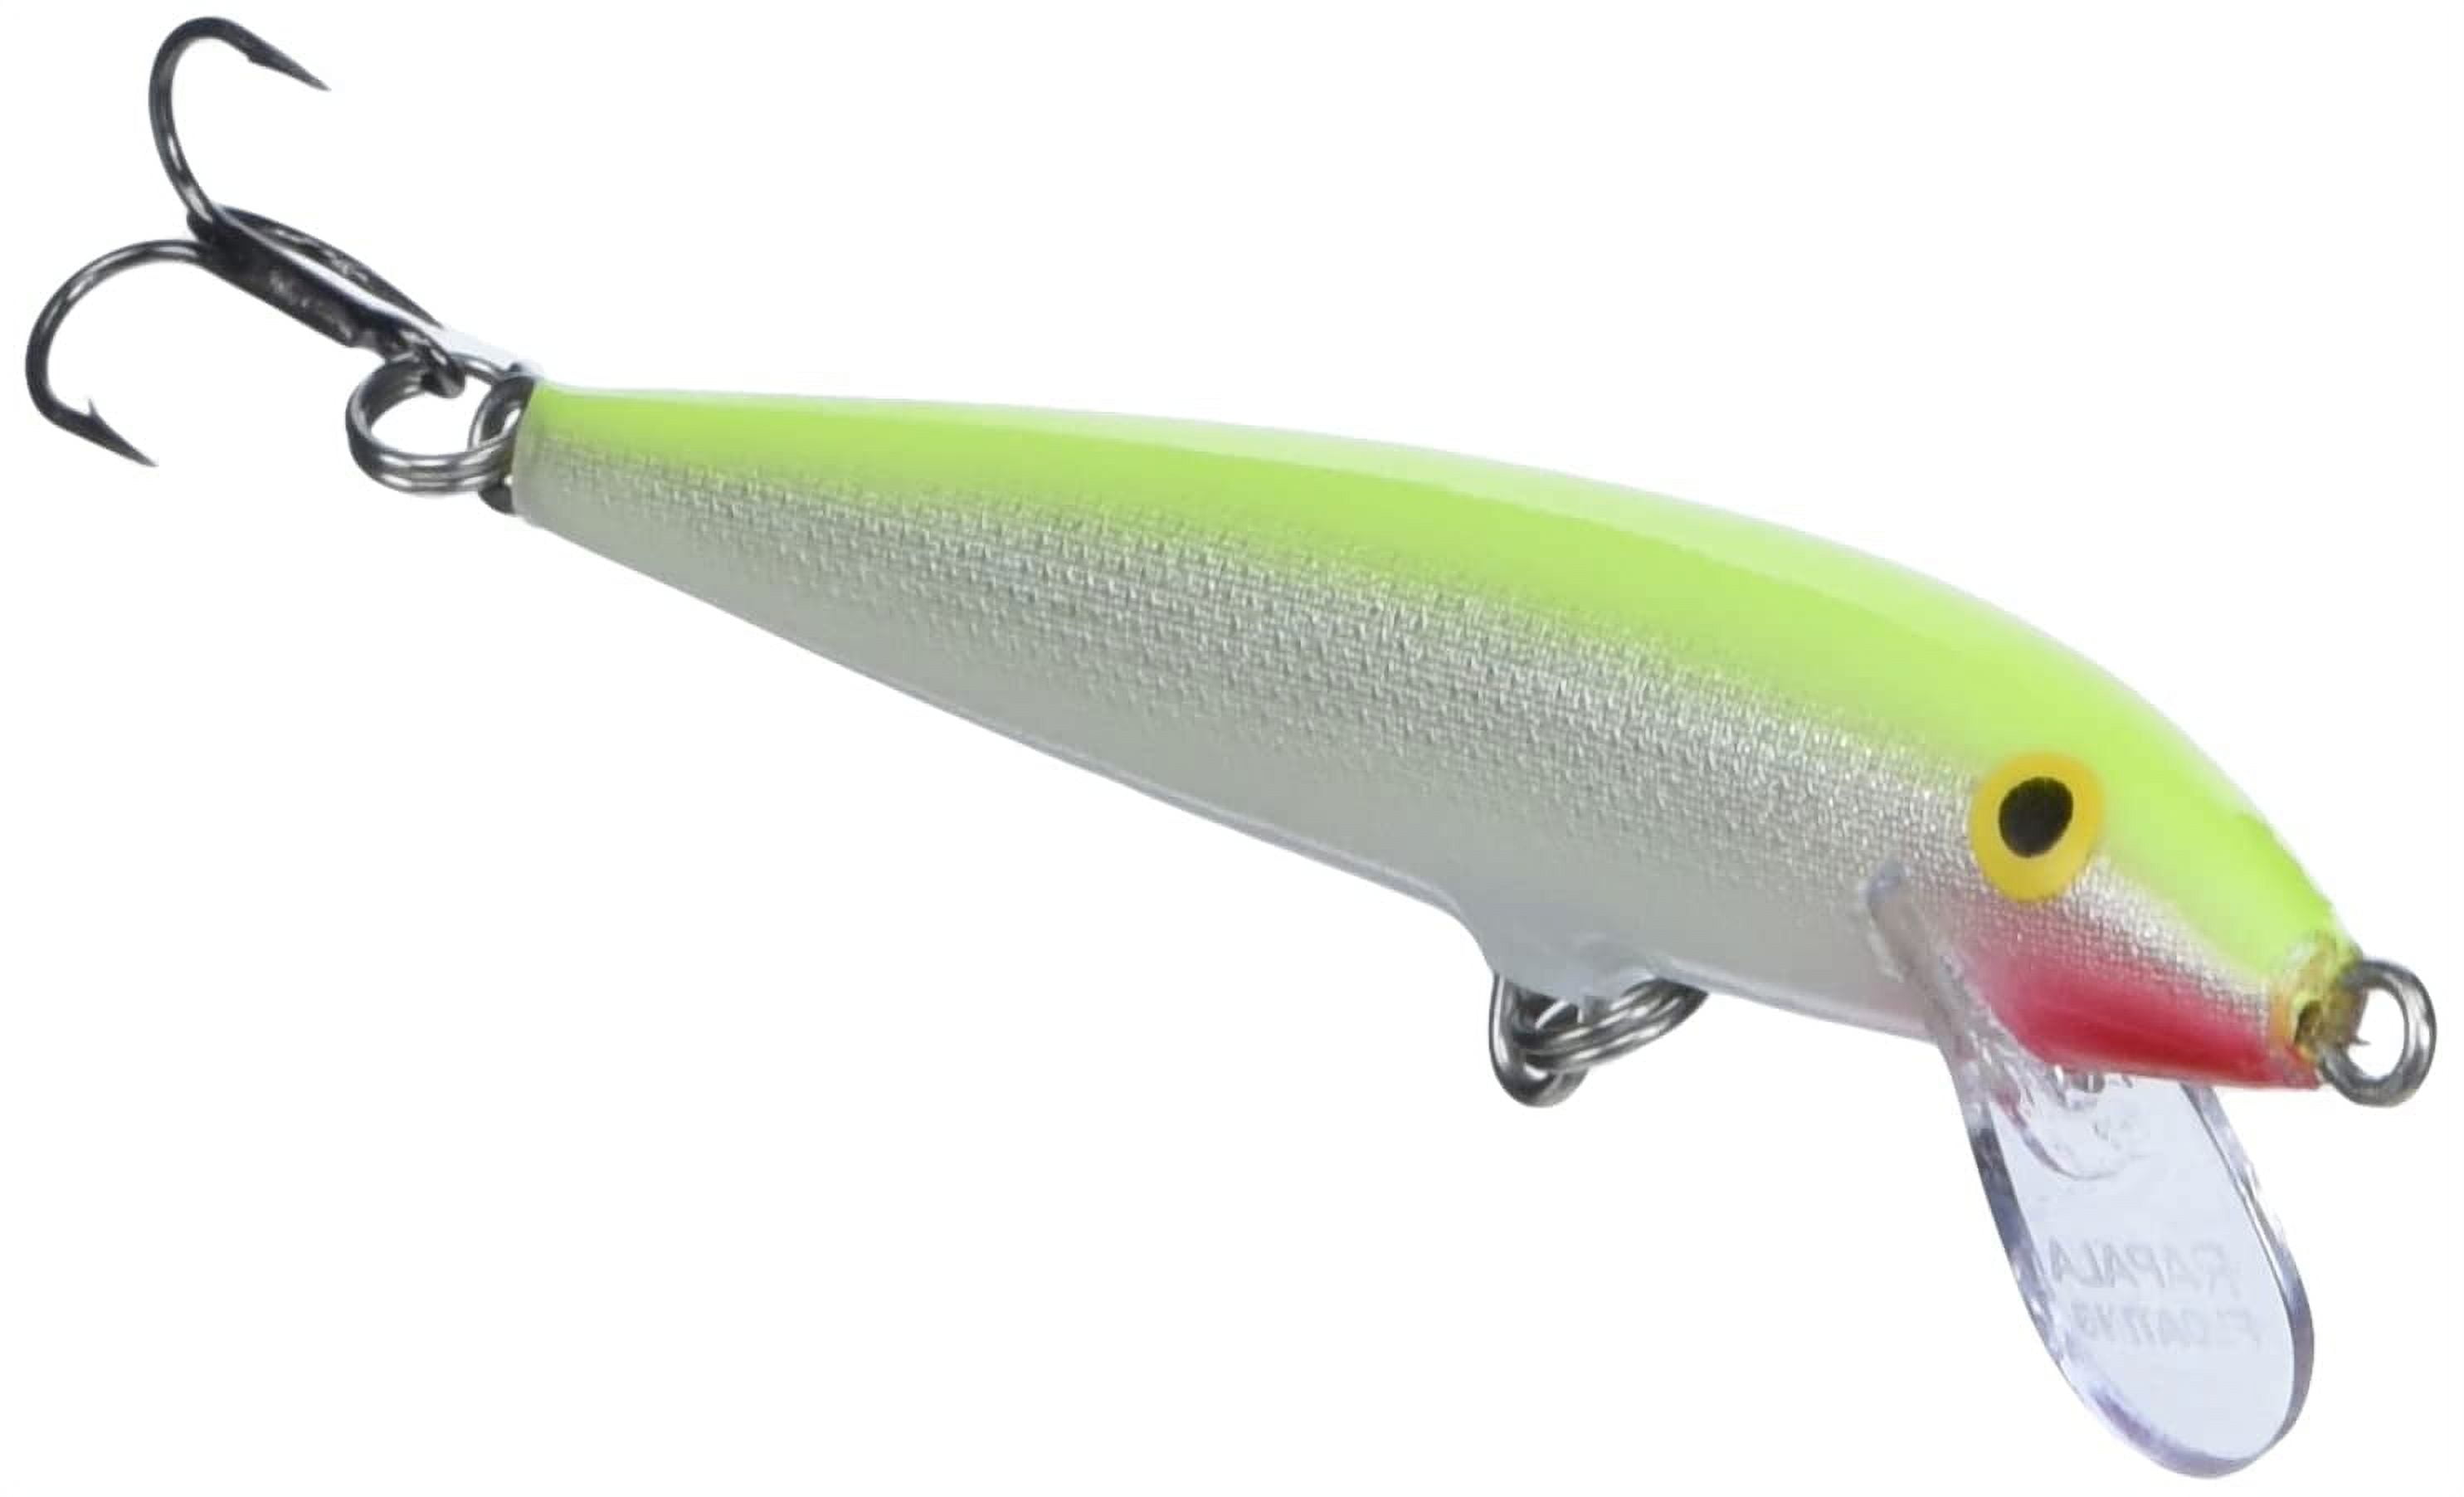 Rapala Original Floating Minnow 09 Fishing Lure 3.5 3/16oz Silver  Fluorescent Chartreuse 